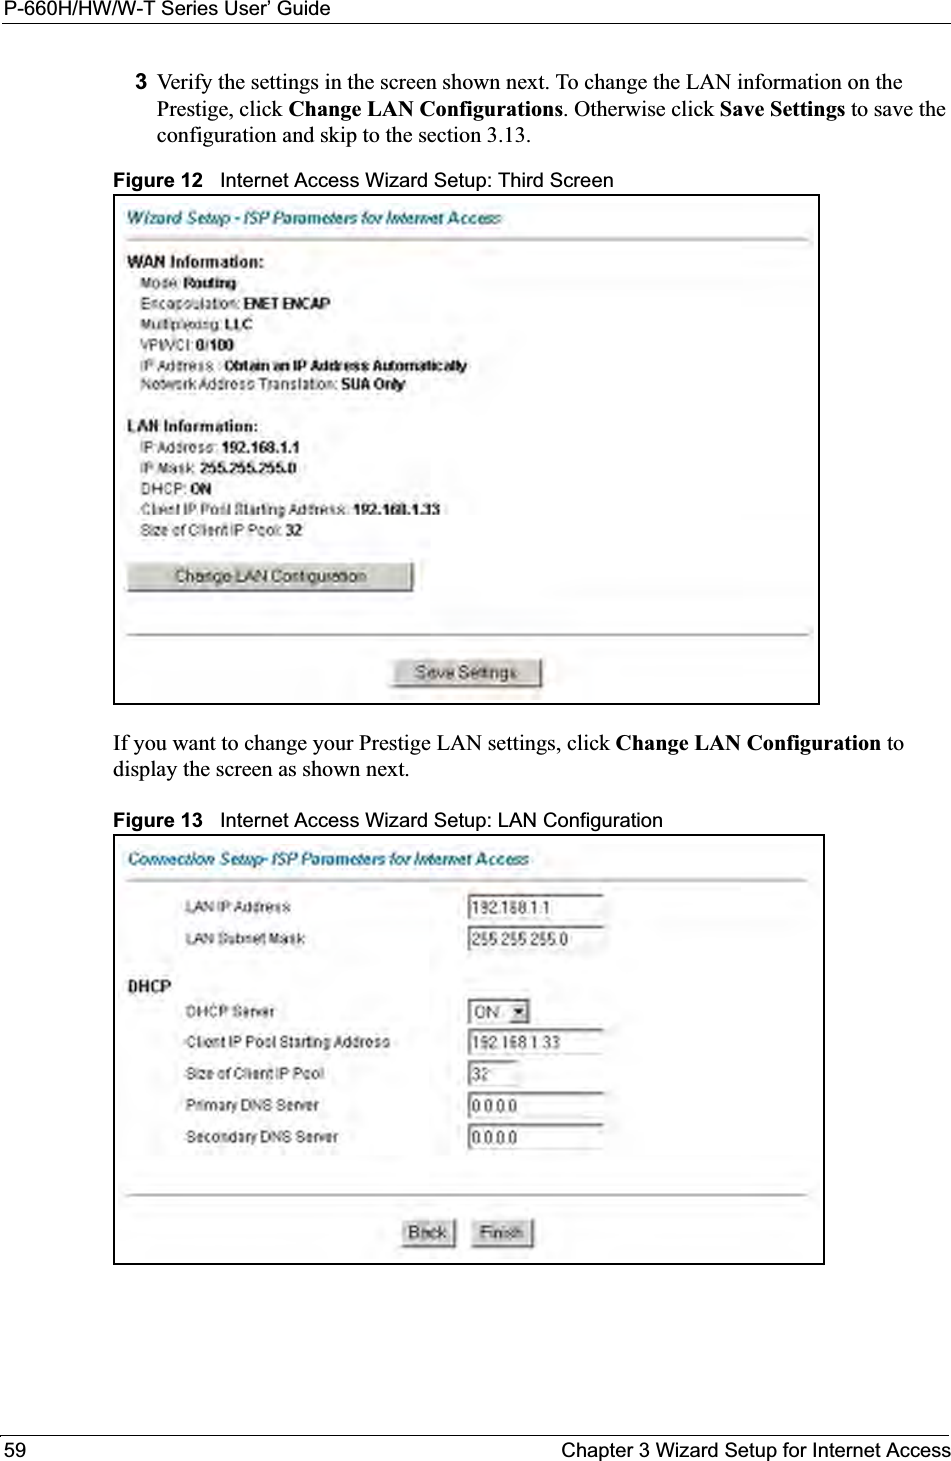 P-660H/HW/W-T Series User’ Guide59 Chapter 3 Wizard Setup for Internet Access3Verify the settings in the screen shown next. To change the LAN information on the Prestige, click Change LAN Configurations. Otherwise click Save Settings to save the configuration and skip to the section 3.13. Figure 12   Internet Access Wizard Setup: Third ScreenIf you want to change your Prestige LAN settings, click Change LAN Configuration to display the screen as shown next. Figure 13   Internet Access Wizard Setup: LAN Configuration 